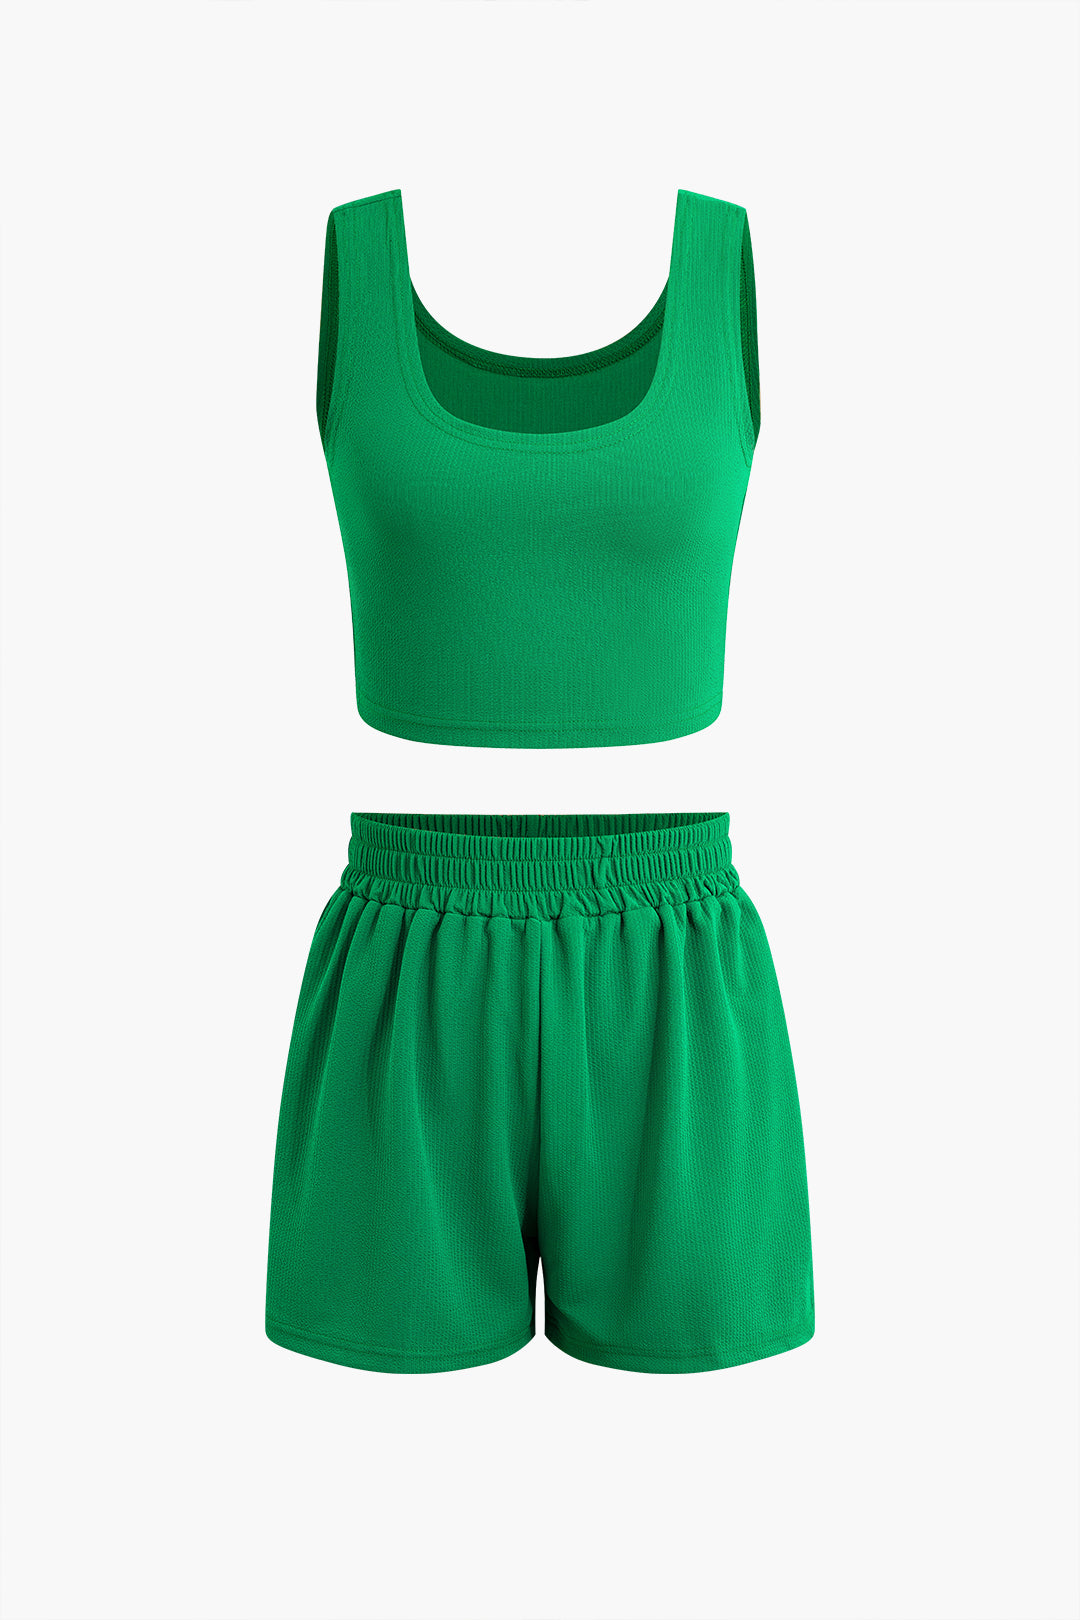 Basic Solid Crop Tank Top And Short Sets